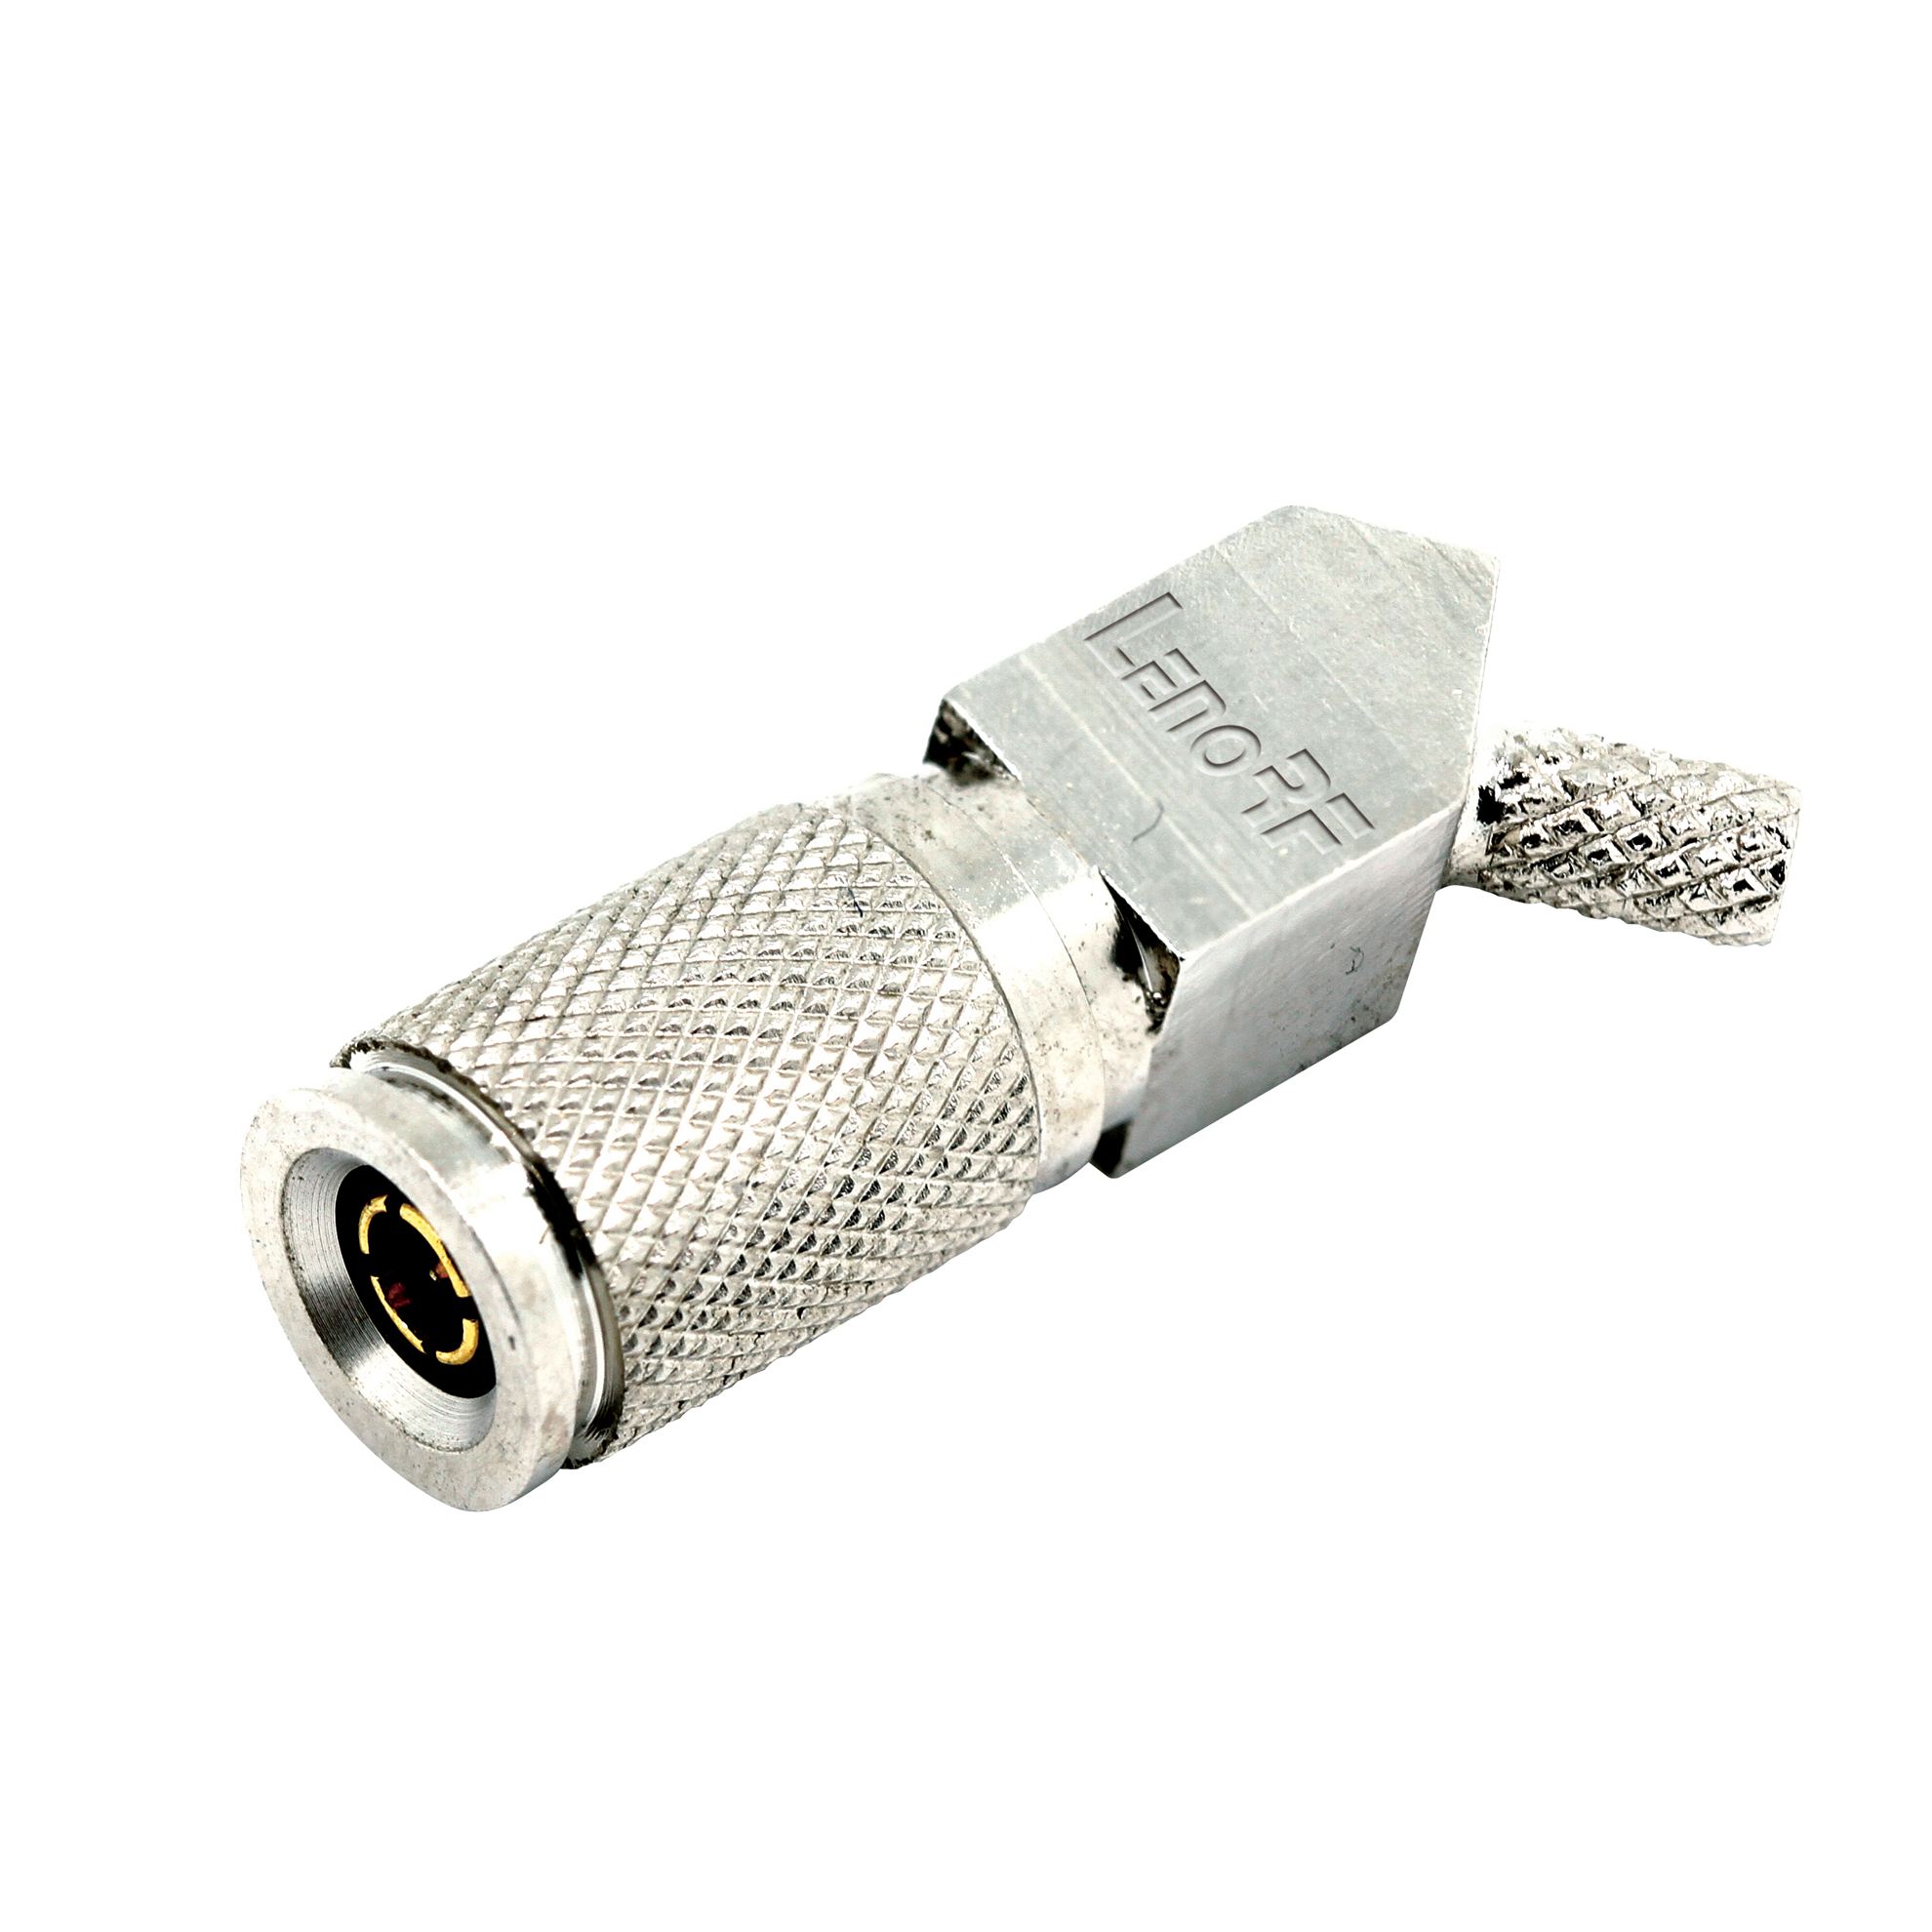 1.0/2.3 Connector Plug Right Angle Crimping For ST121 Coaxial Cable